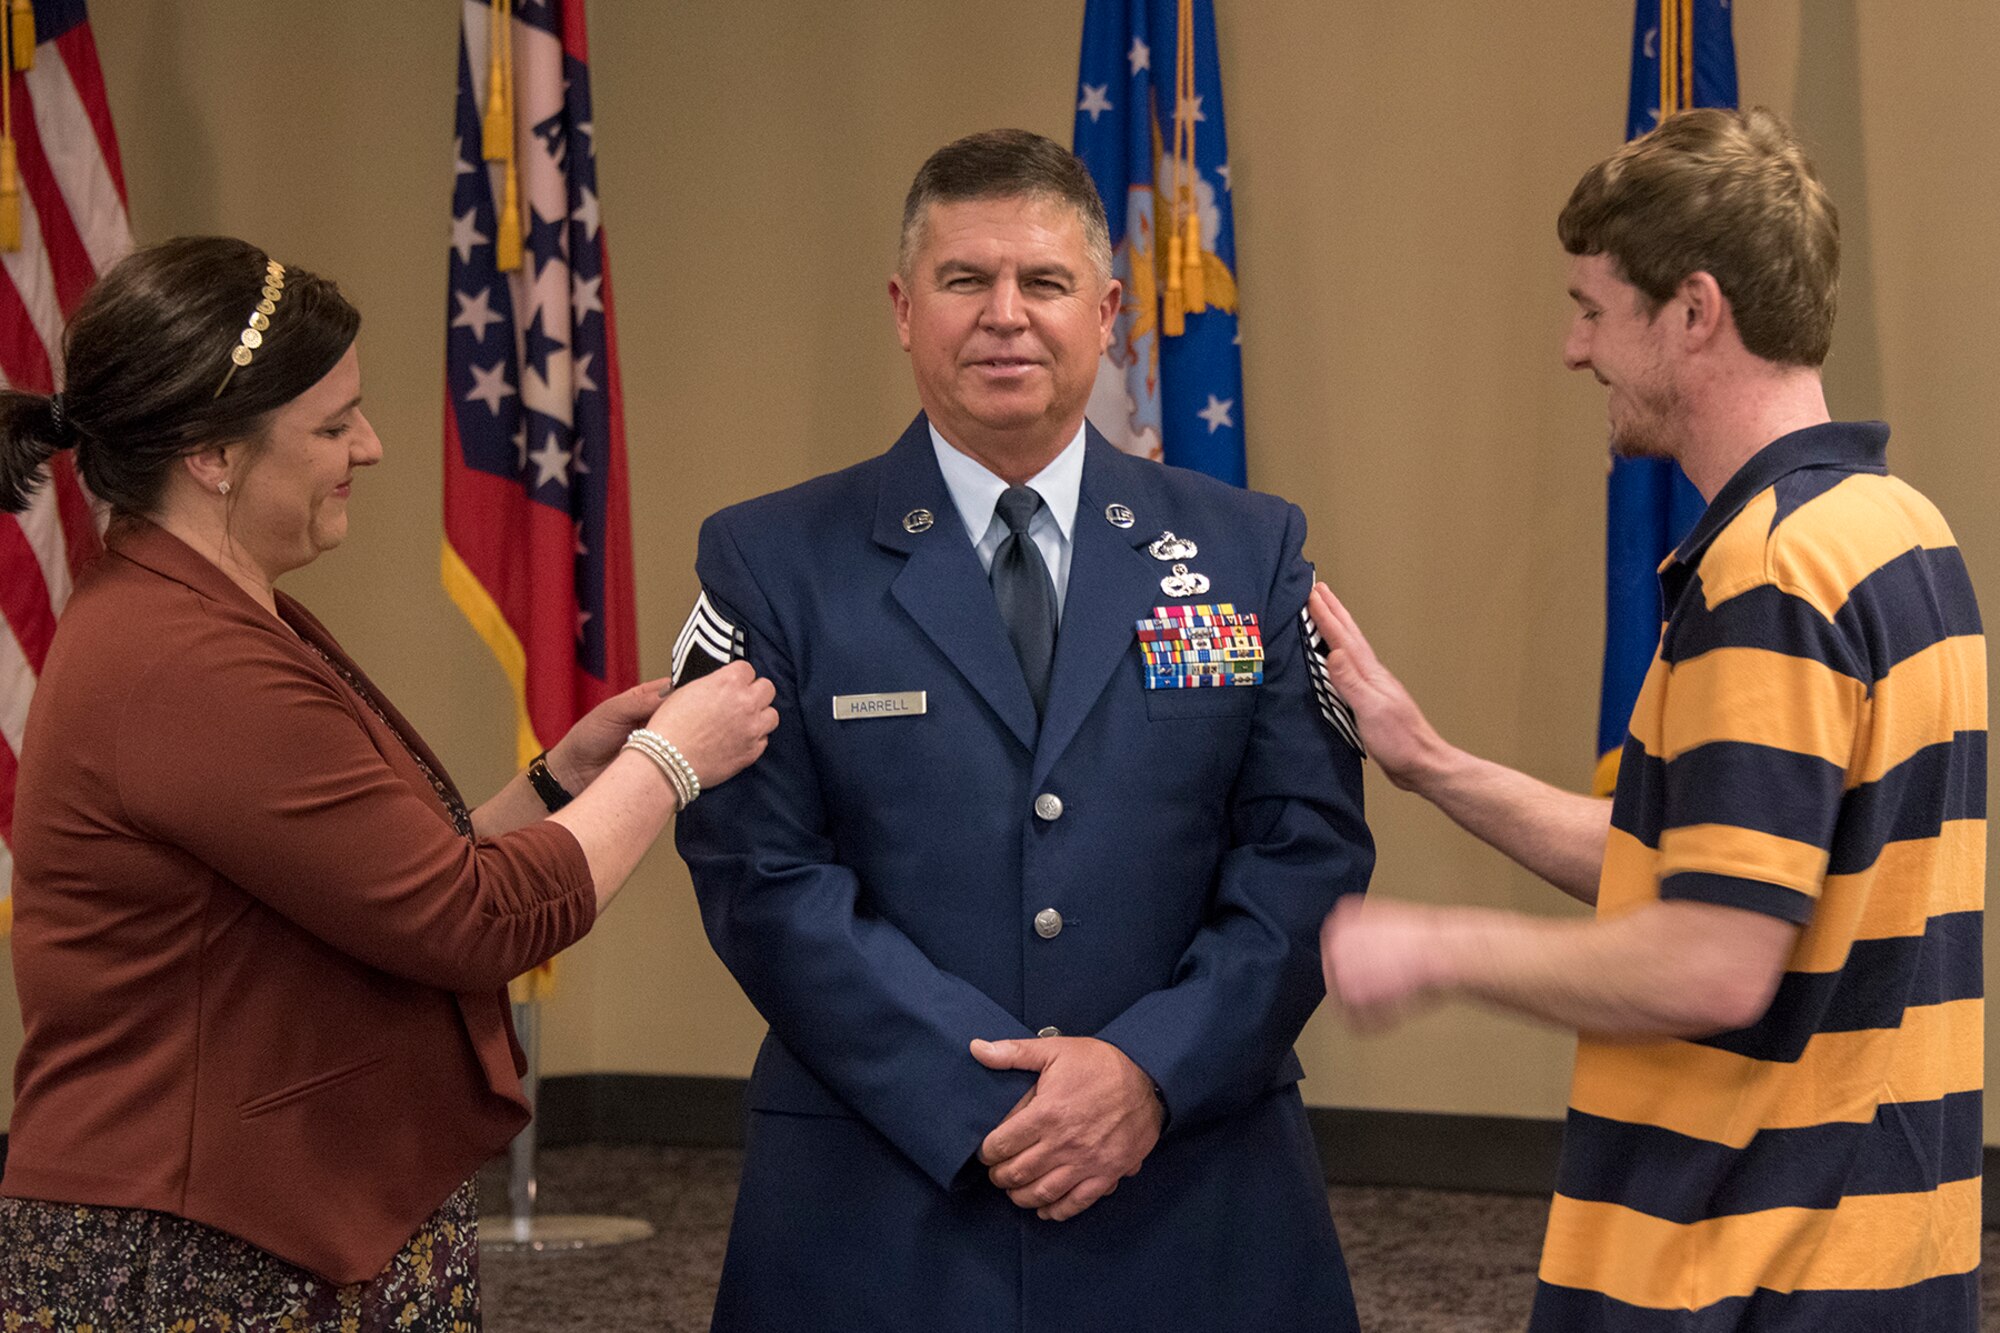 Chief Master Sgt. Nathan E. Harrell, 288th Operations Support Squadron superintendent, has his stripes pinned on by family members during his promotion ceremony at Ebbing Air National Guard Base, Fort Smith, Ark., Feb. 2, 2019. Harrell has over 36 years of military service, and has been a member of the 188th Wing since 1985. (U.S. Air National Guard photo by Staff Sgt. Emmanuel Gutierrez)